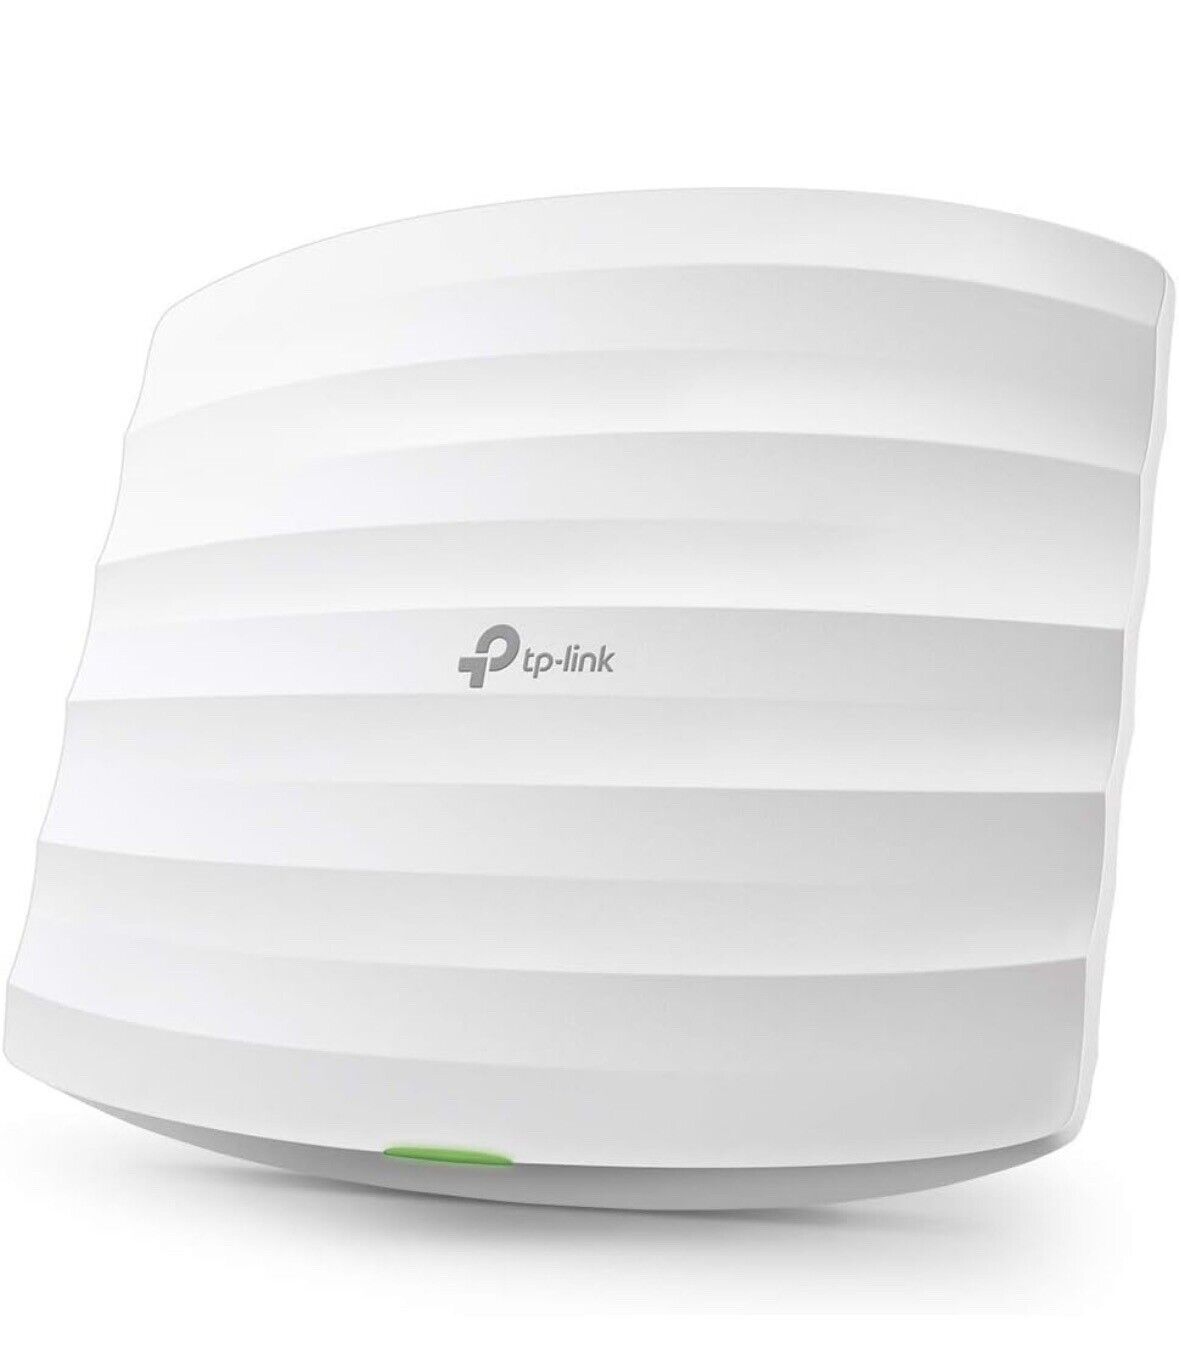 TP-LINK EAP245 V3 Dual Band AC1750 Wireless Access Point